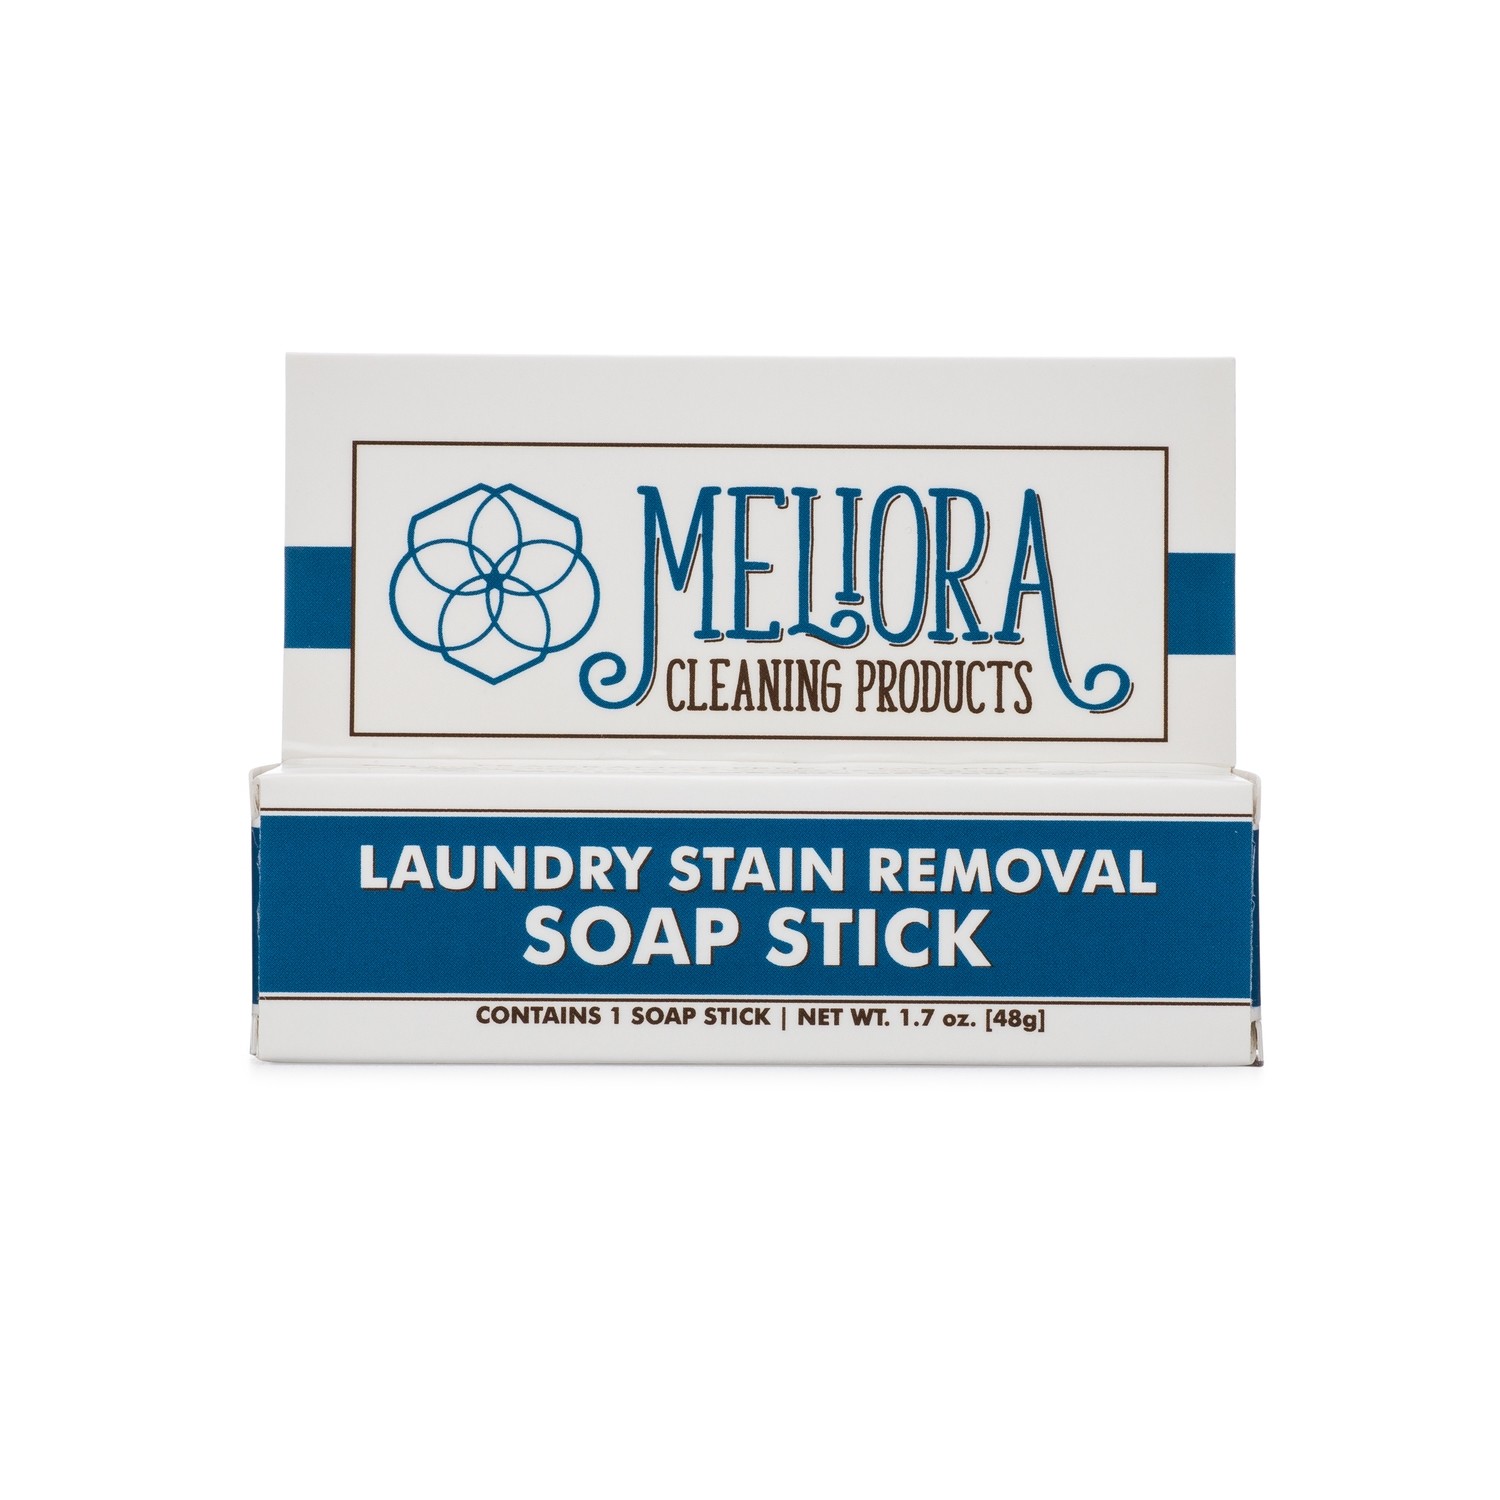 Soap Stick for Laundry Stains